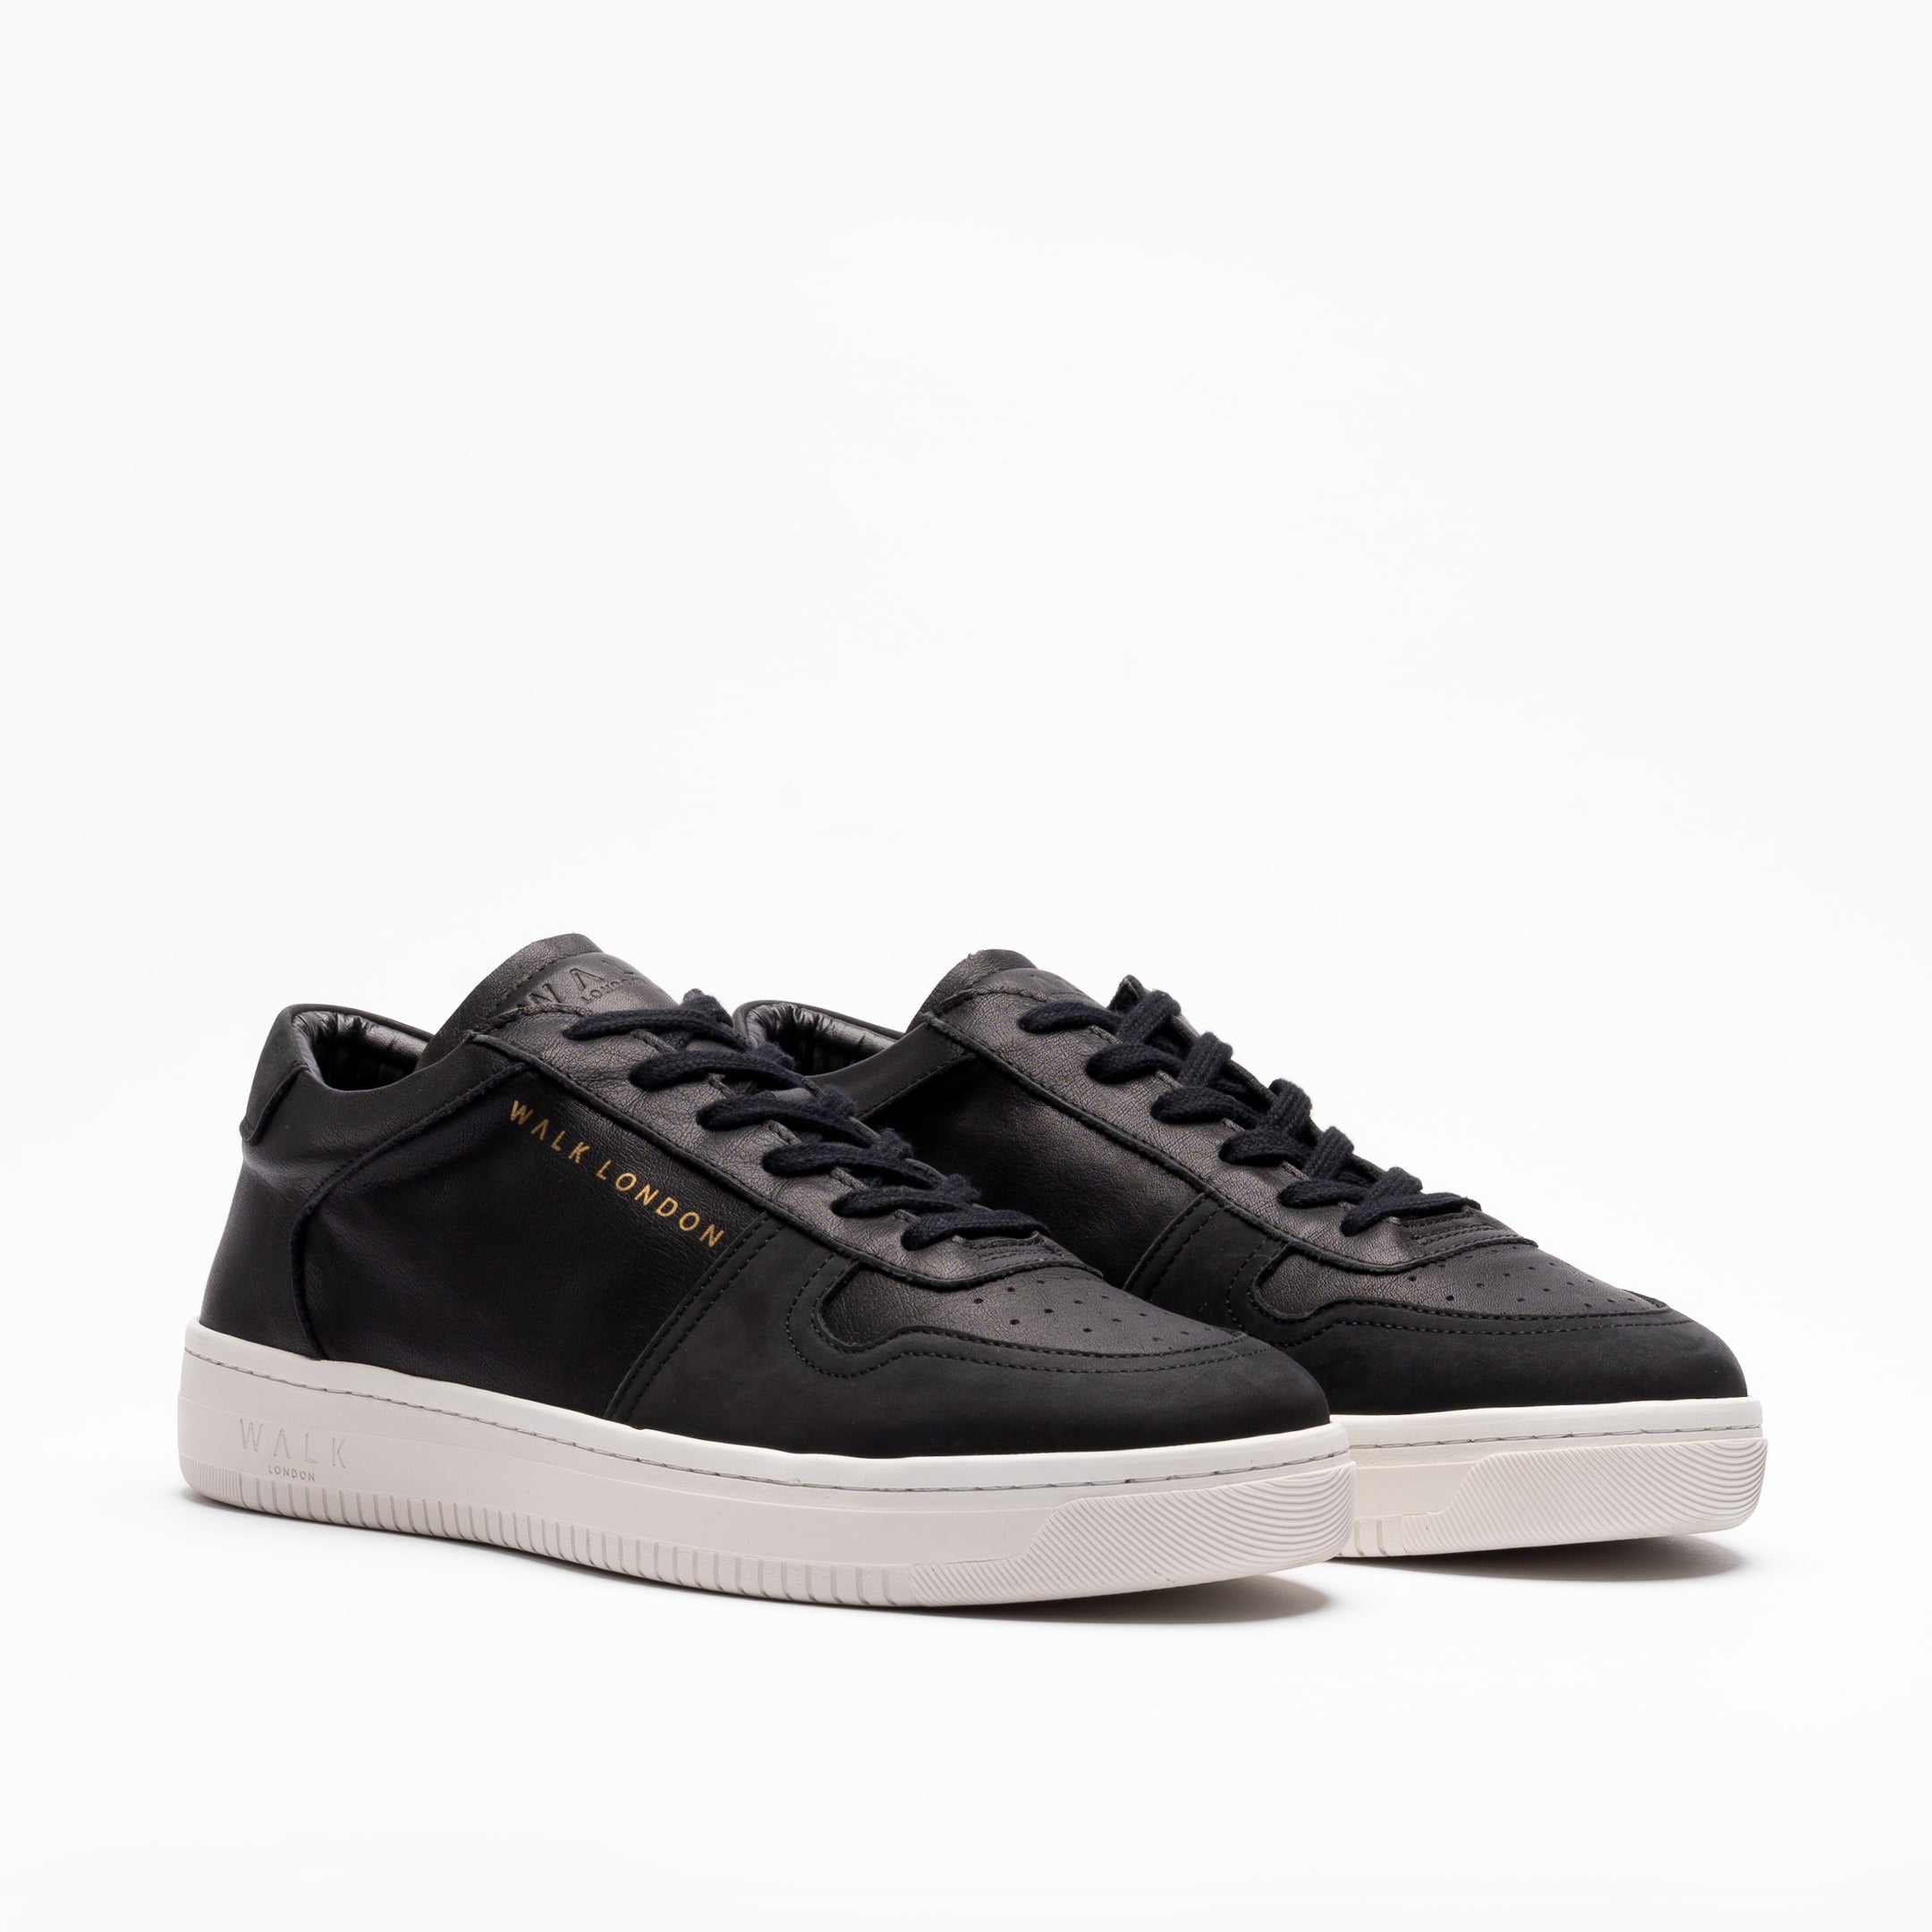 Walk London Neo Sneaker Black Leather and Suede